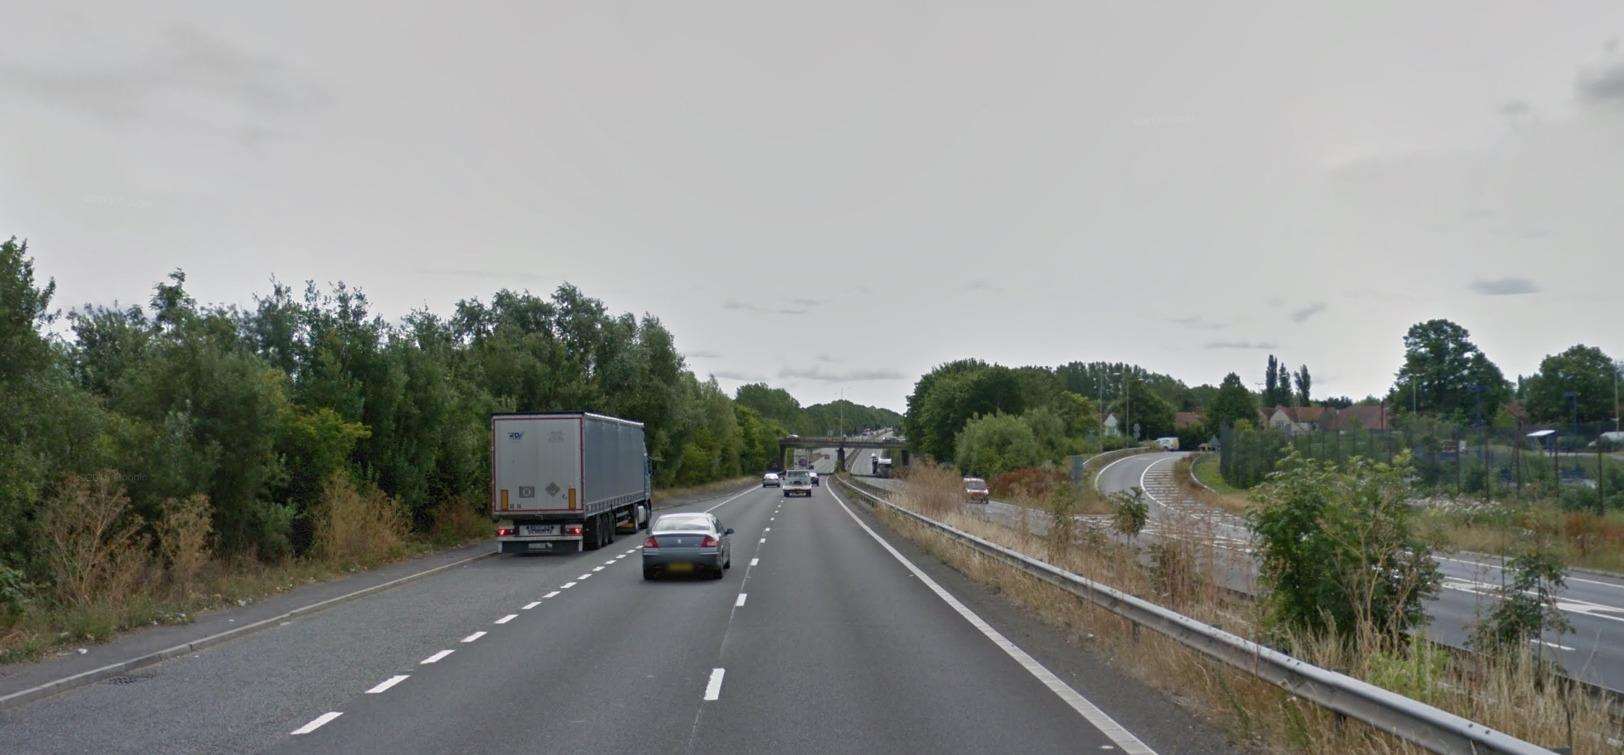 The incident occurred on the A2 coastbound lane near Wincheap (7333635)